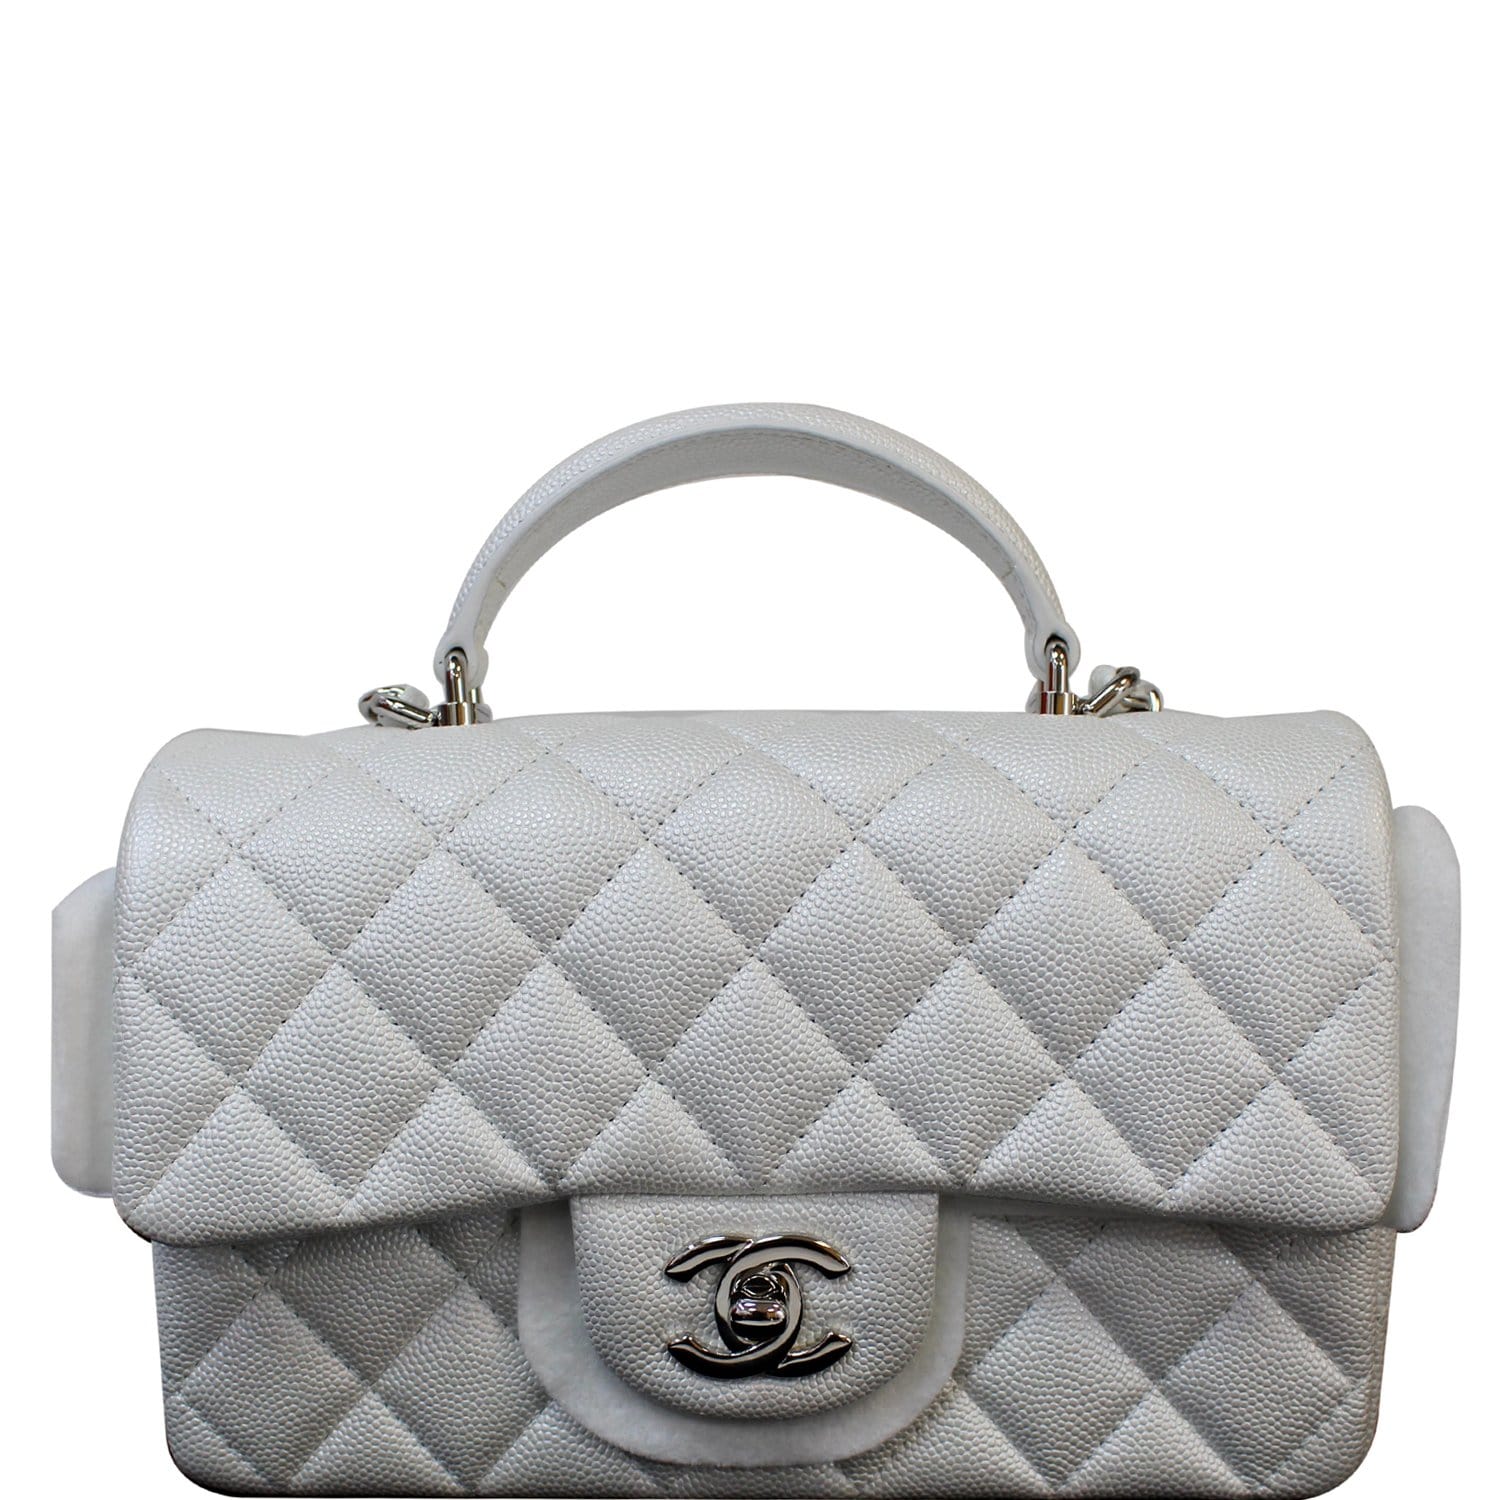 Chanel Mini Flap Bag With Top Handle  MsAuth